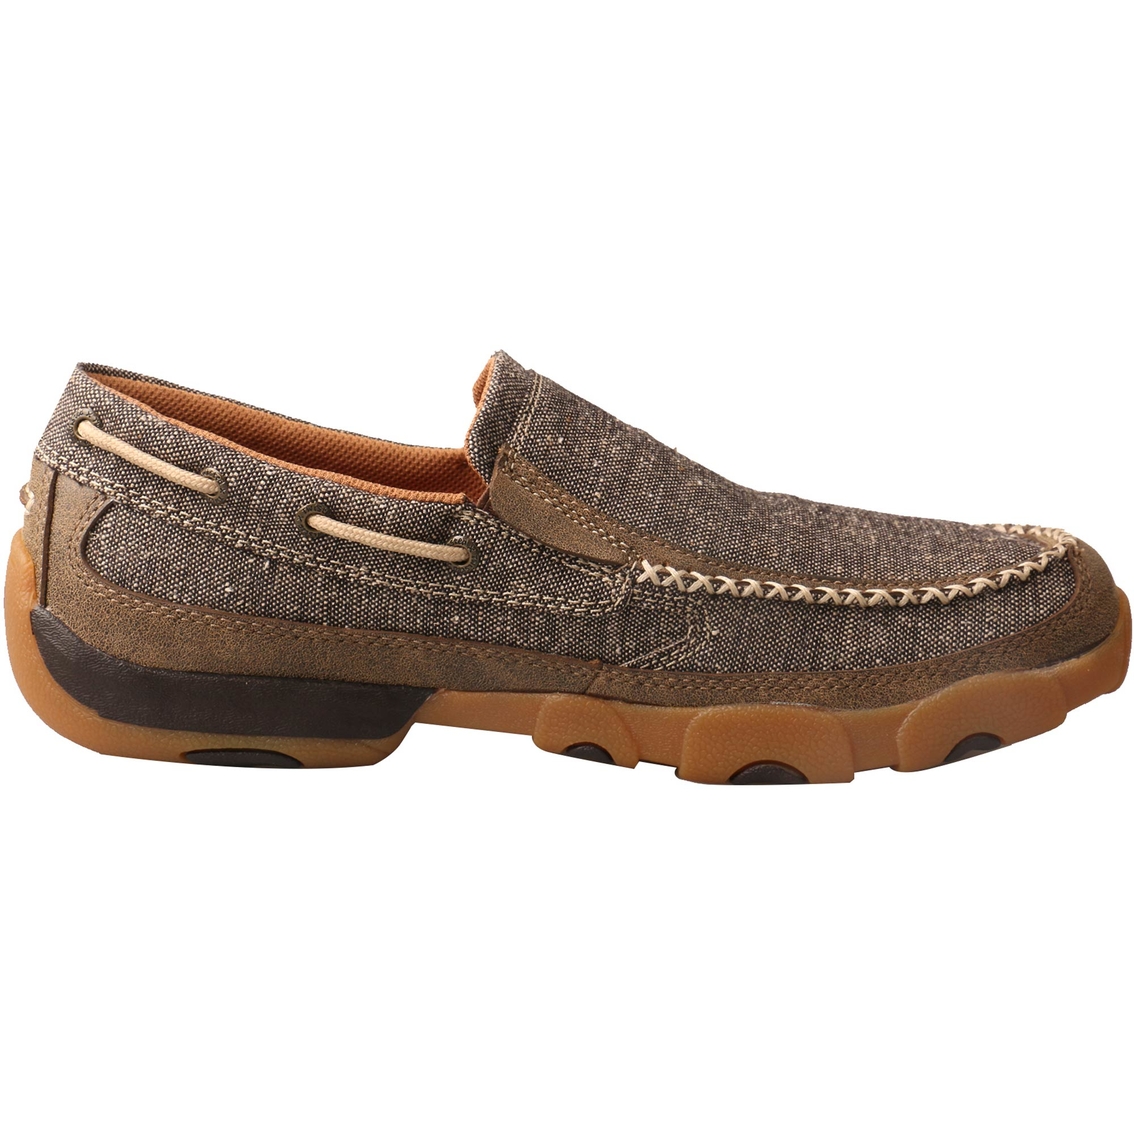 Twisted X Men's Slip-On Driving Moc Dust Shoes - Image 2 of 7